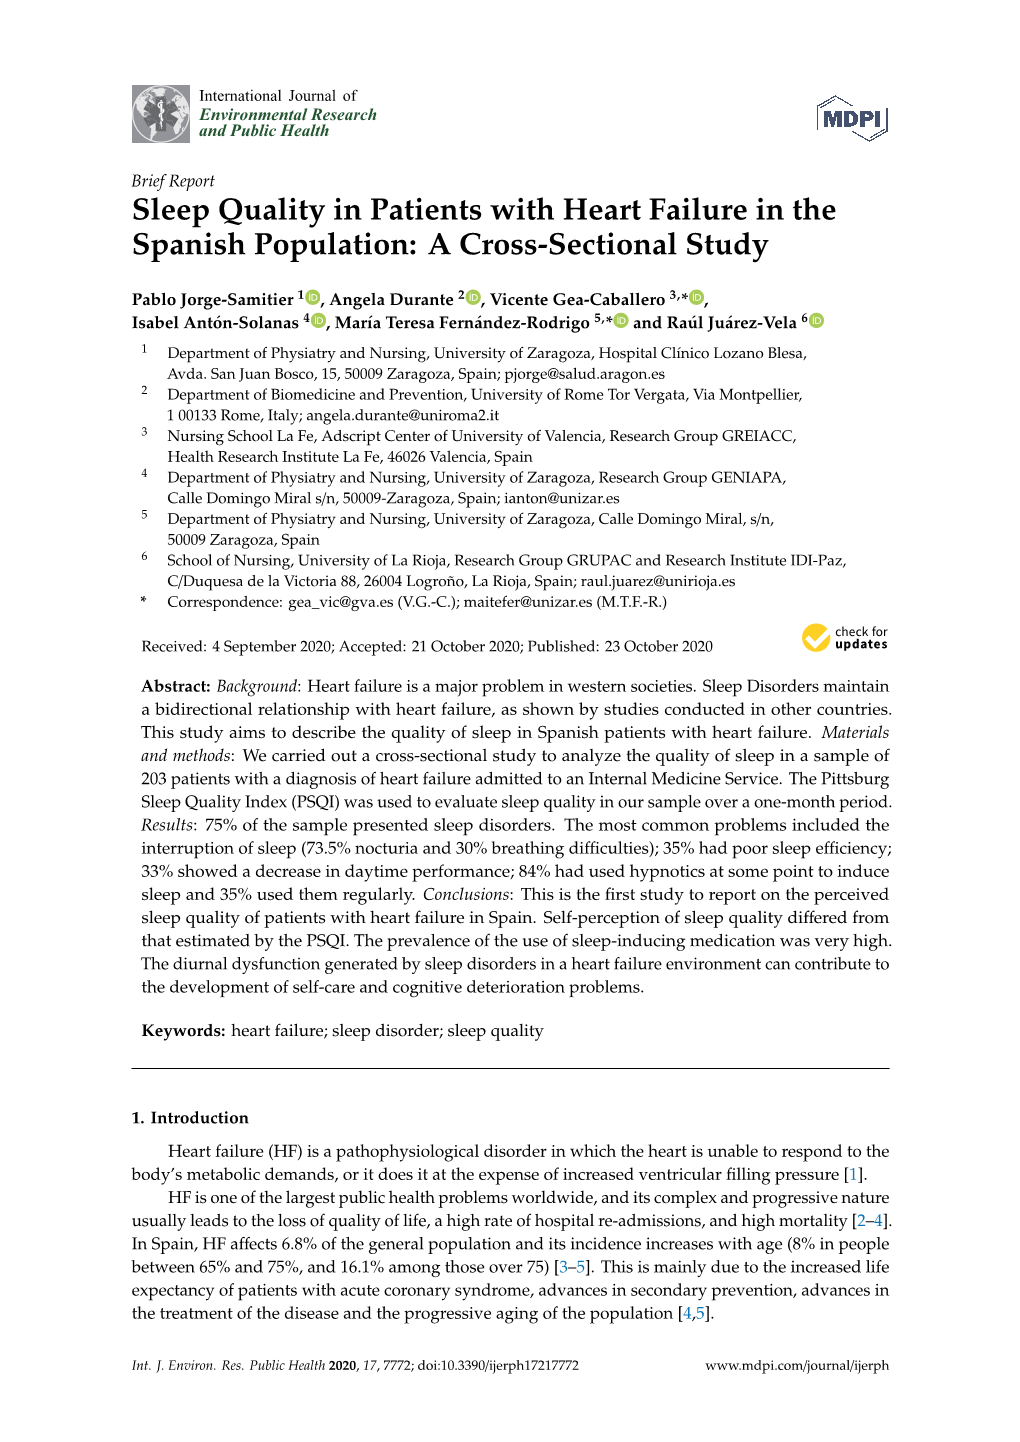 Sleep Quality in Patients with Heart Failure in the Spanish Population: a Cross-Sectional Study